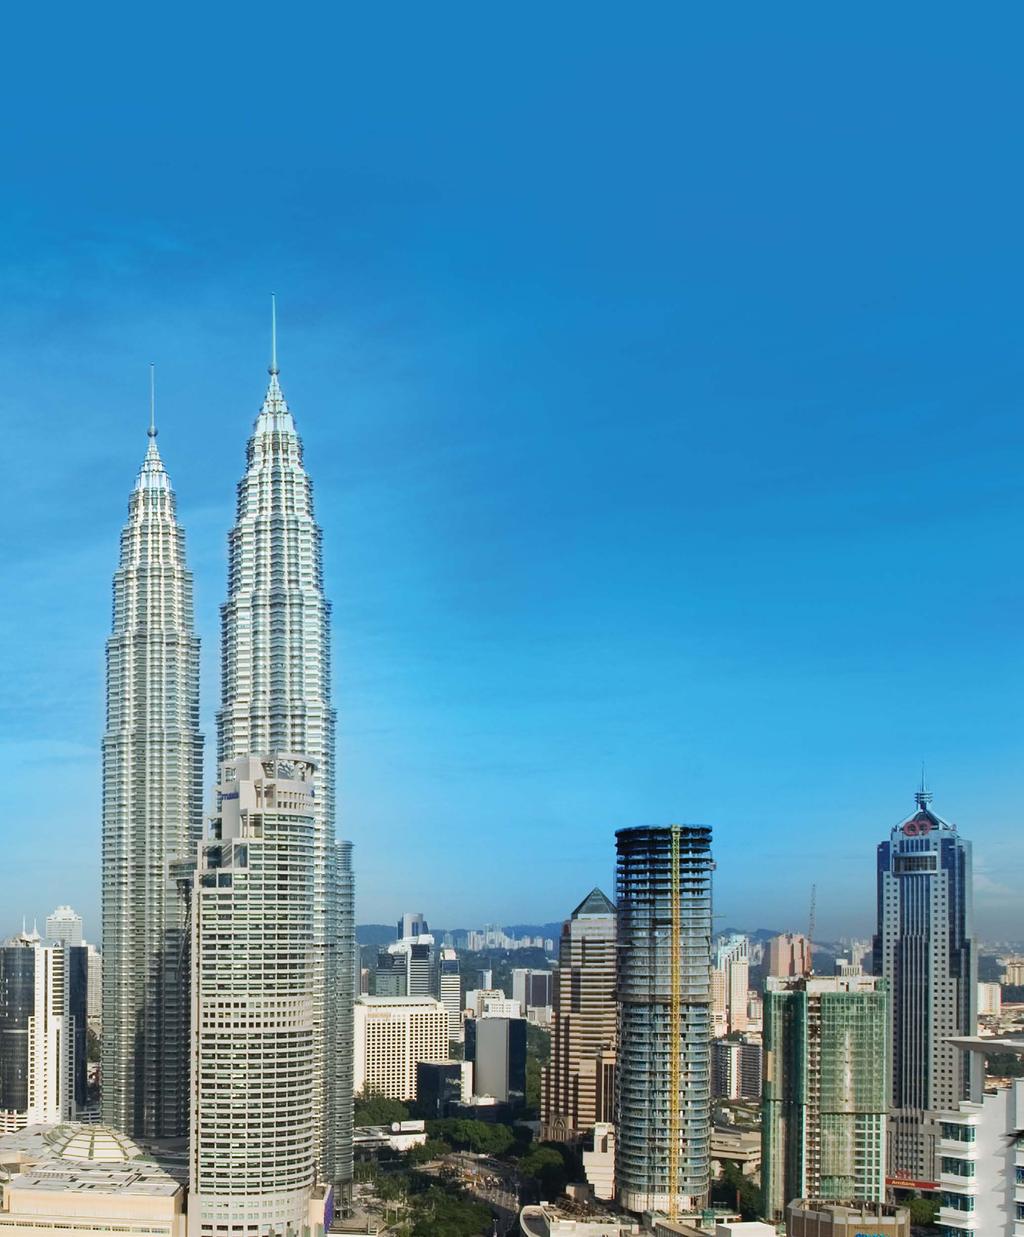 Today, Malaysia enjoys an important market position in Asia, where 60% of the world s population resides.